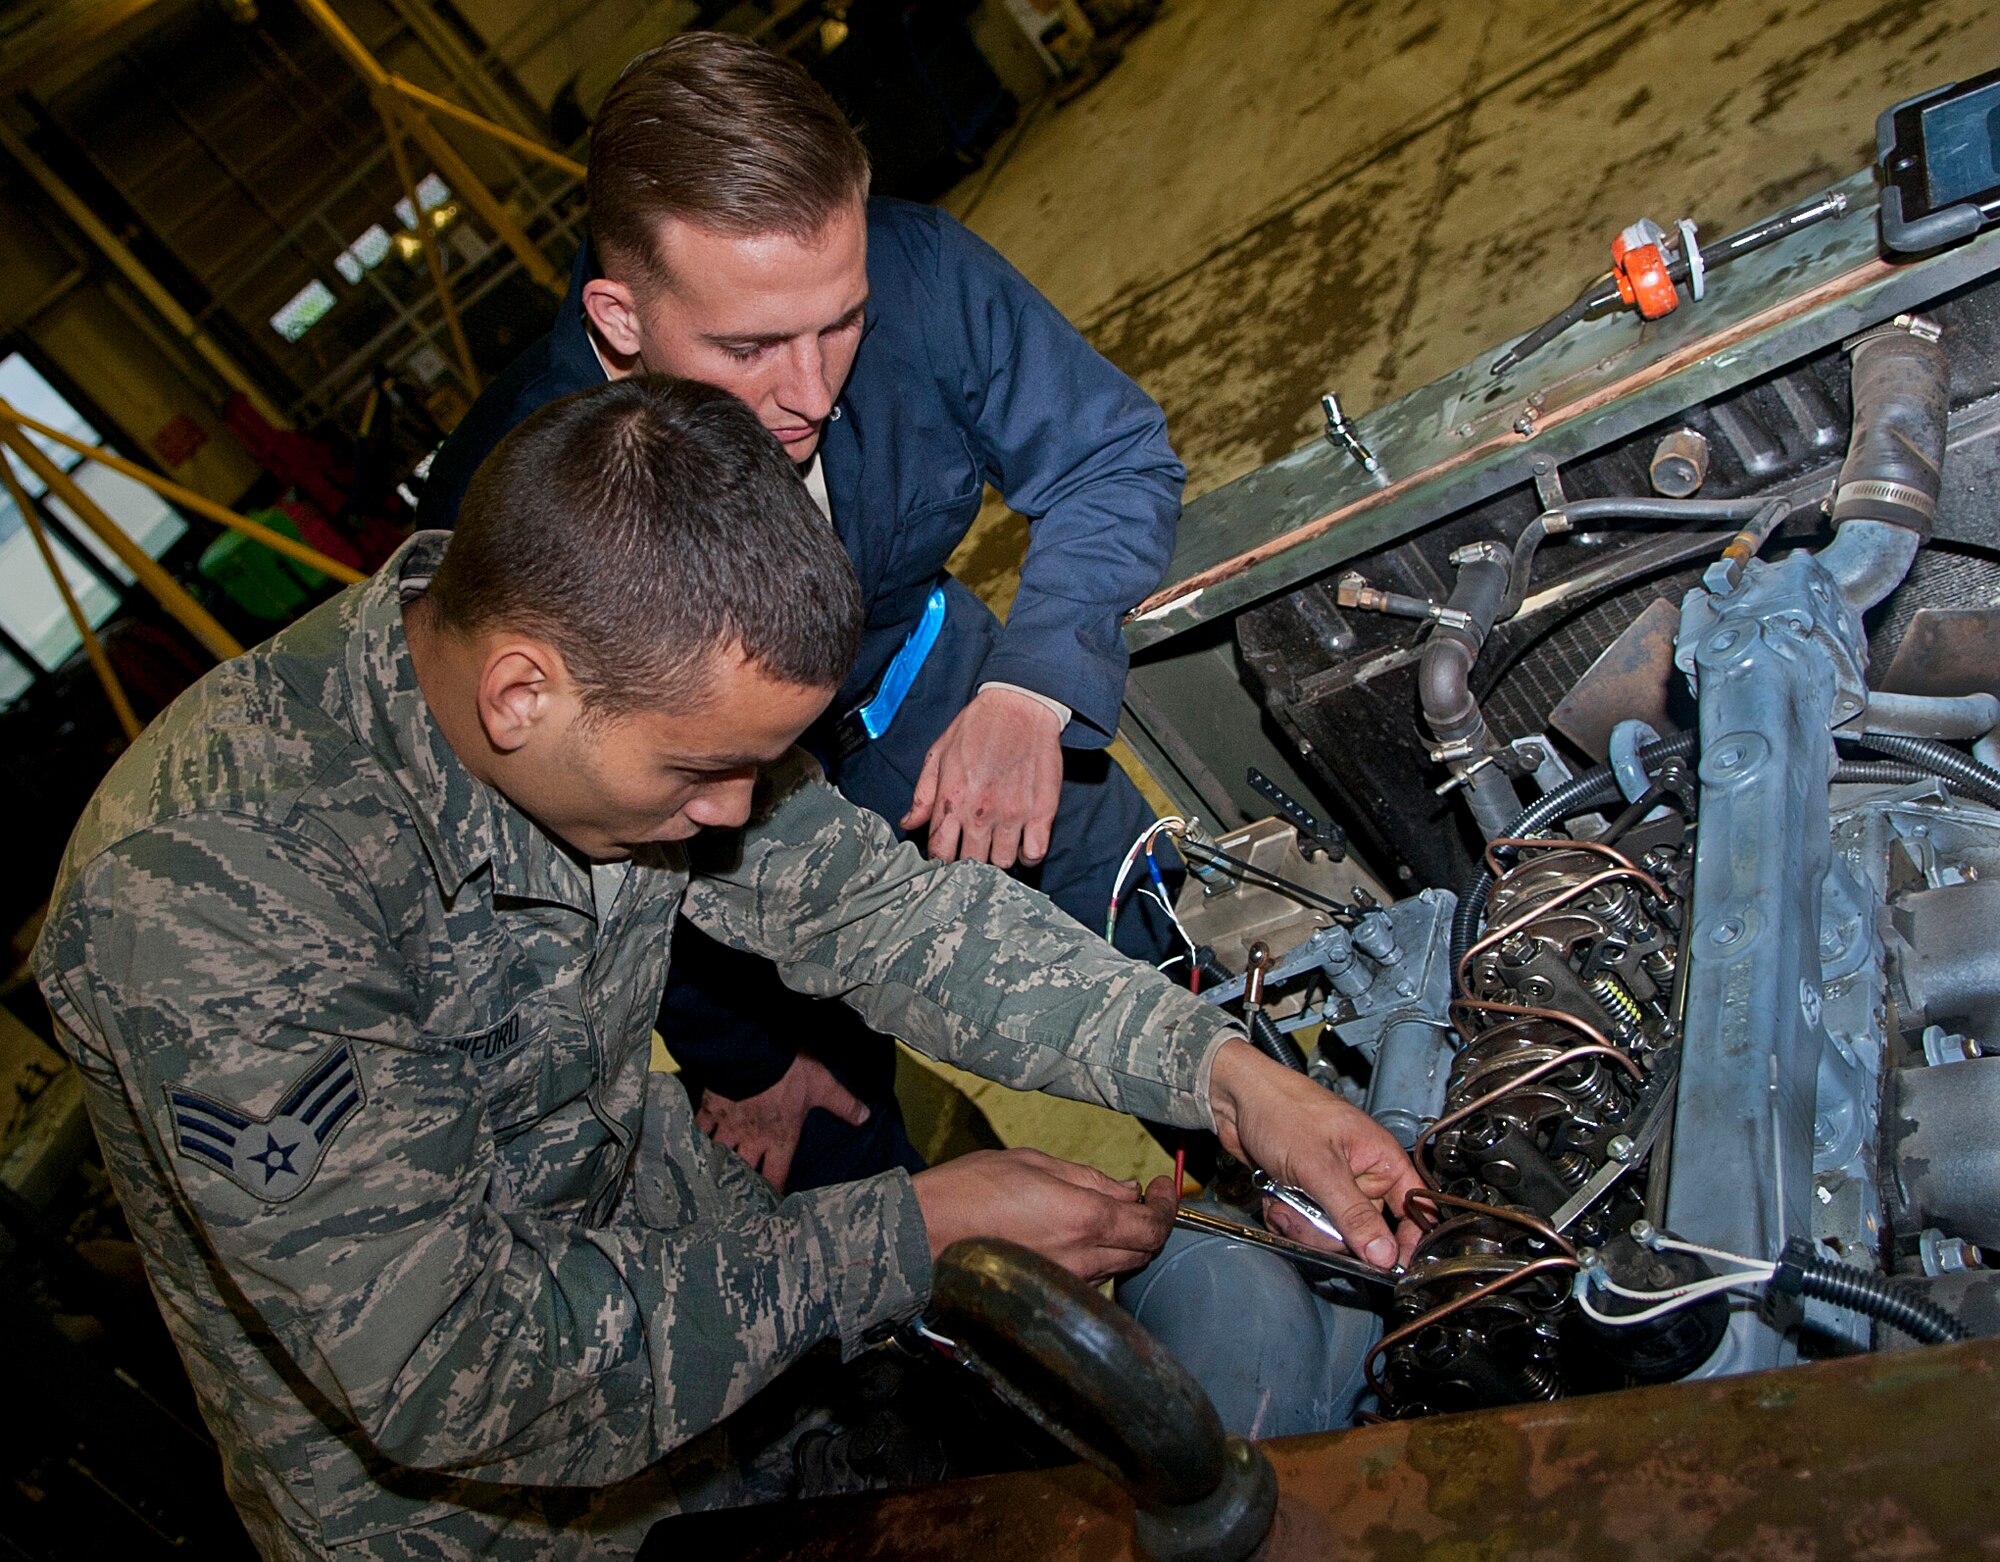 (From left) Senior Airman Cody Crawford, 5th Maintenance Squadron aerospace ground equipment journeyman, and Airman 1st Class Jeremy Graff, 5 MXS AGE apprentice, work on a malfunctioning engine at Minot Air Force Base, N.D., Oct. 5, 2016. The AGE Airmen are responsible for upholding equipment standards by performing routine maintenance and inspections. (U.S. Air Force photo/Airman 1st Class Jonathan McElderry) 